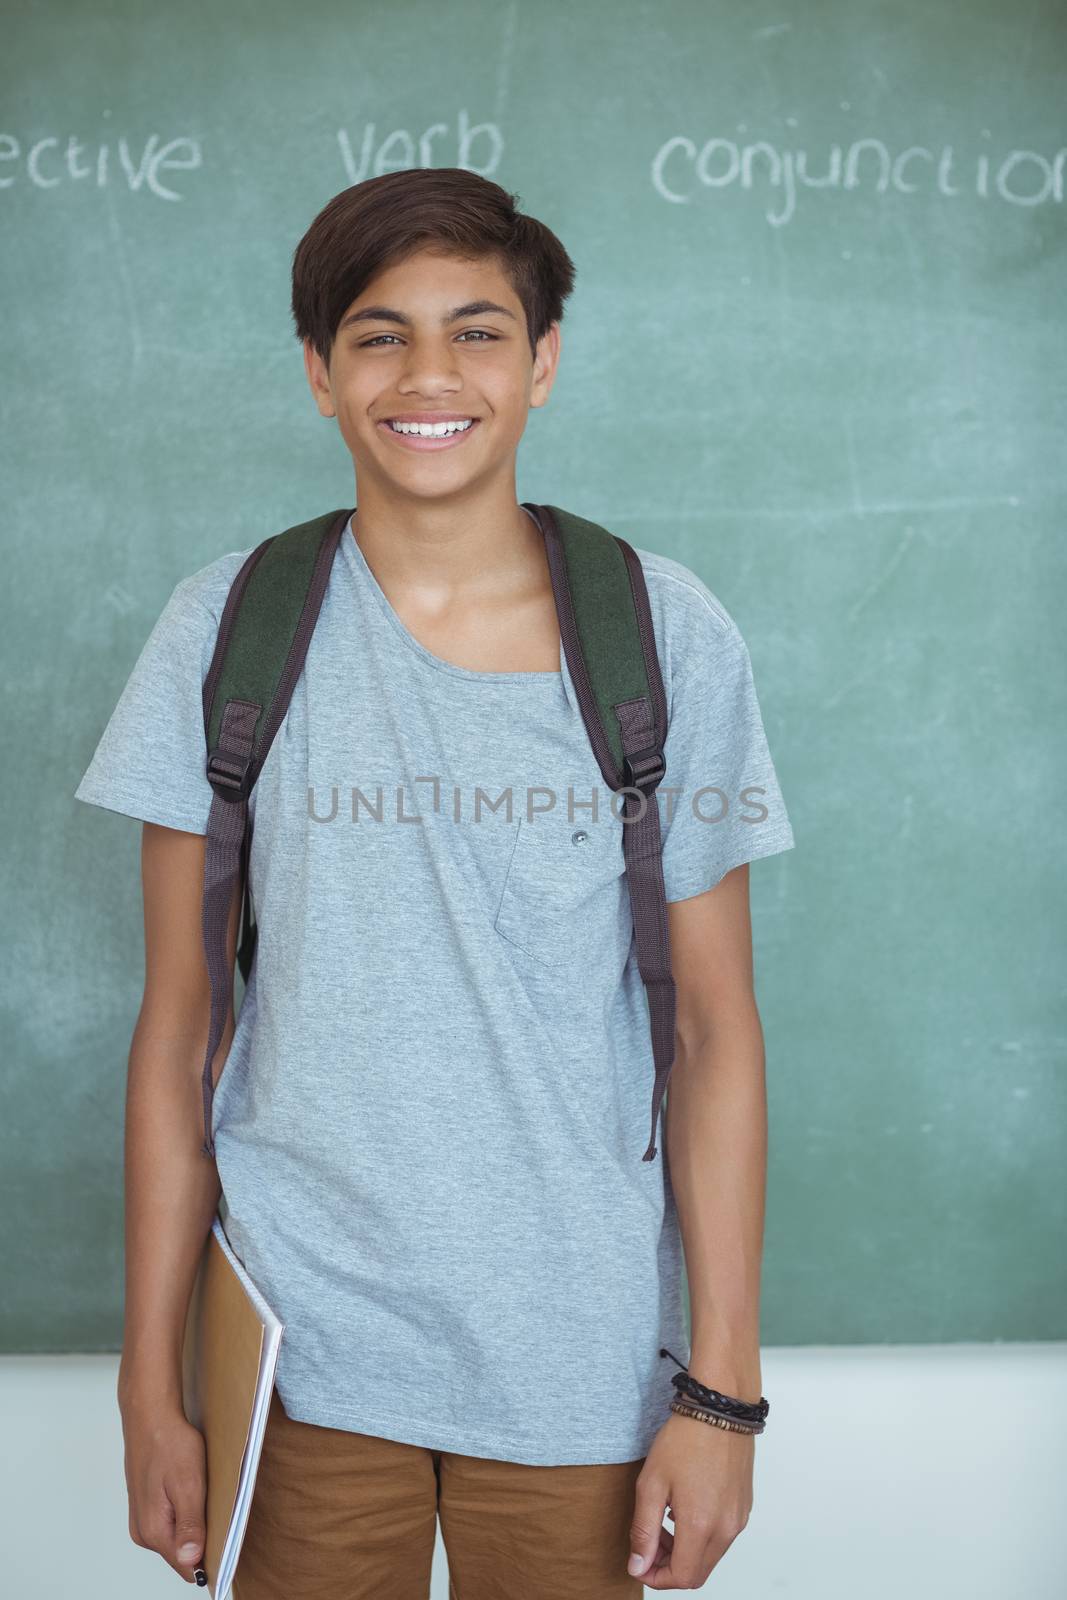 Smiling schoolboy with backpack and book standing against chalkboard in classroom at school